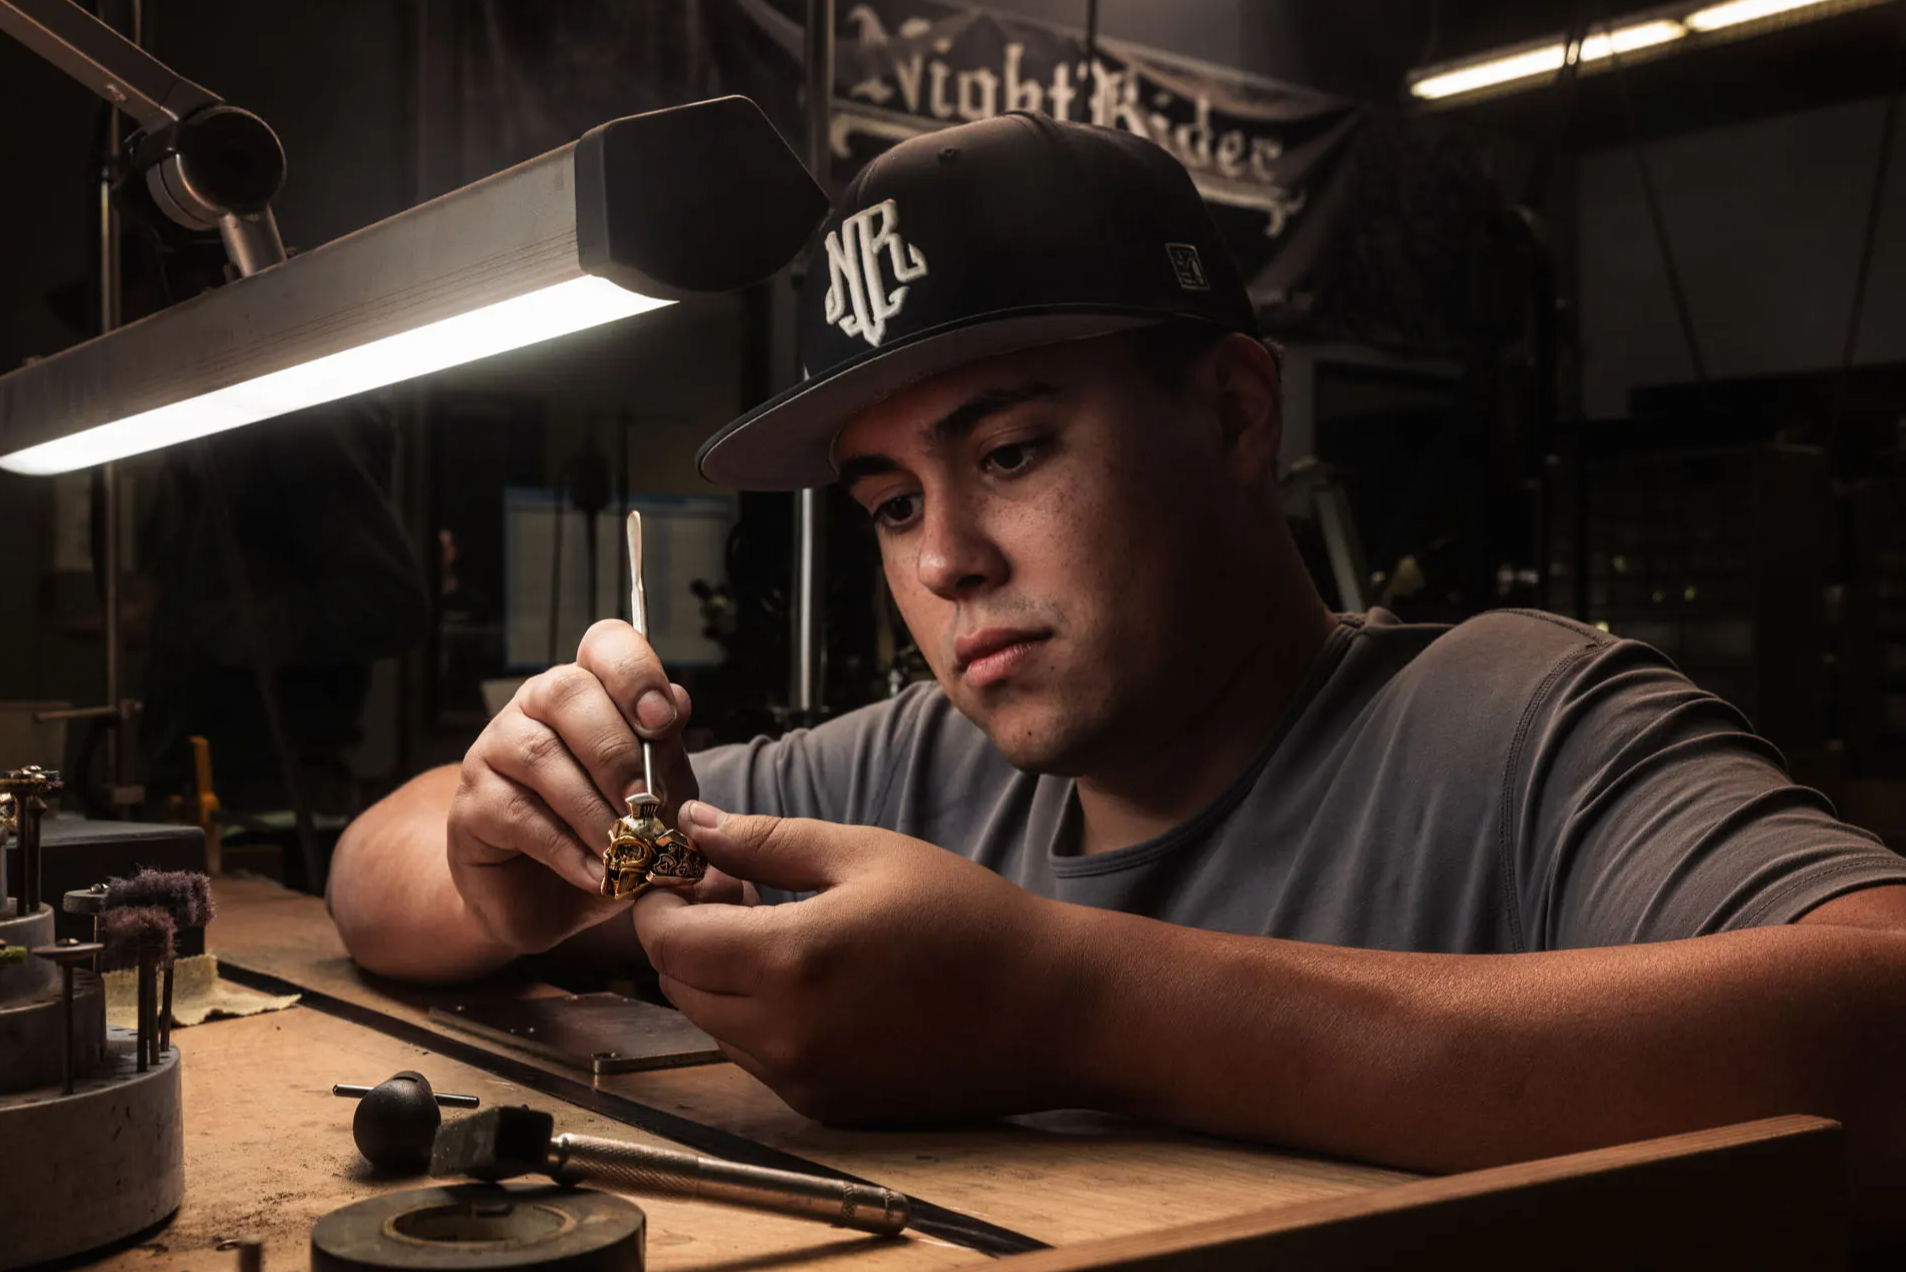 A jeweler handcrafts a NightRider Luxe ring